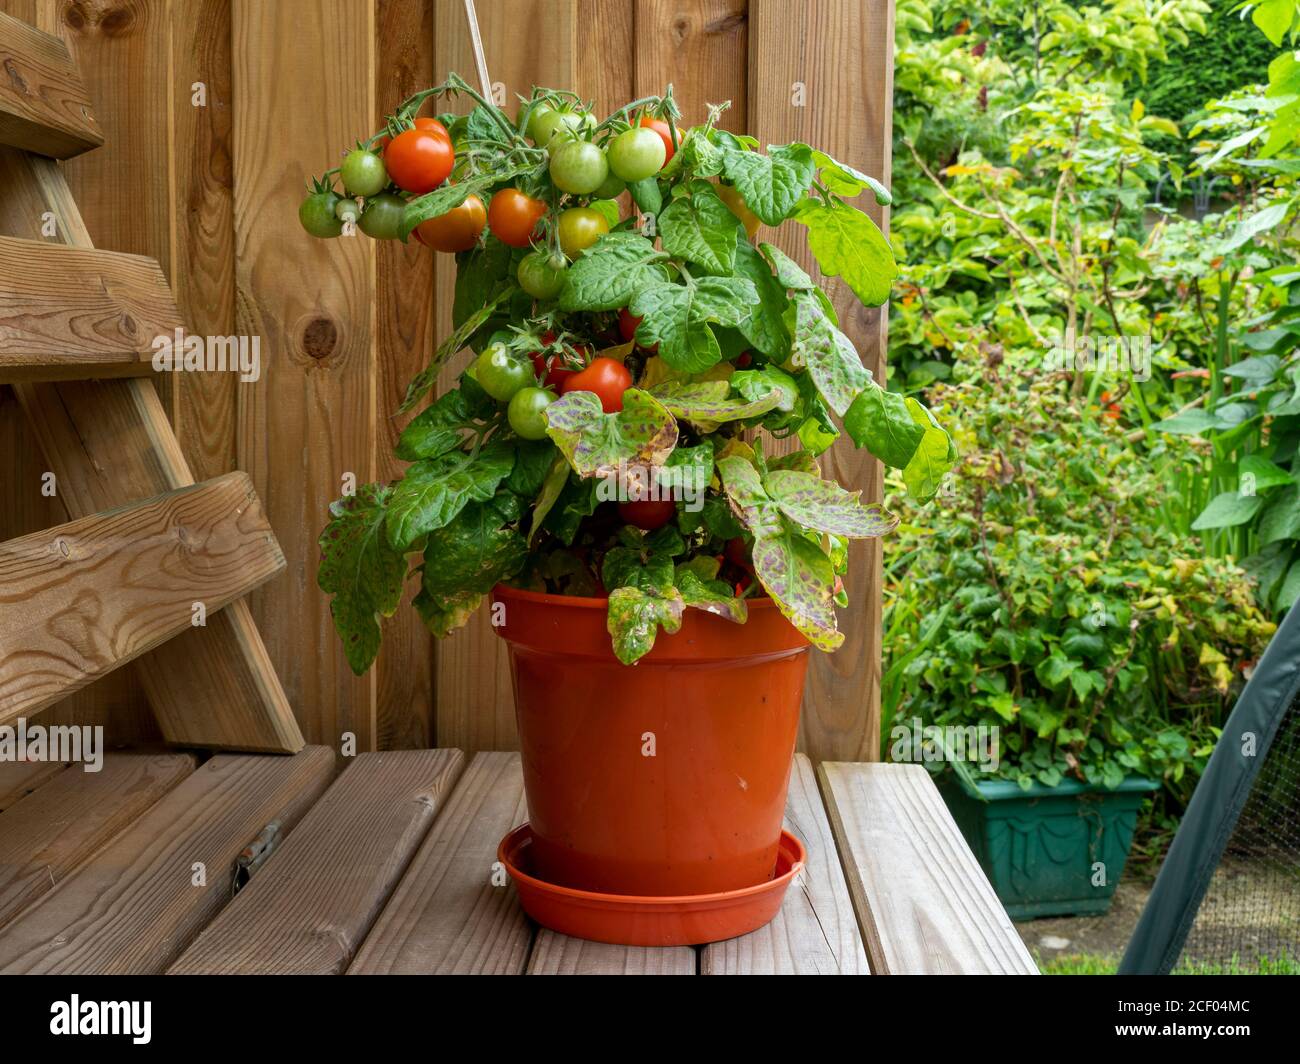 Dwarf tomato plant in a pot with ripe and unripe tomatoes, variety Red Robin Stock Photo